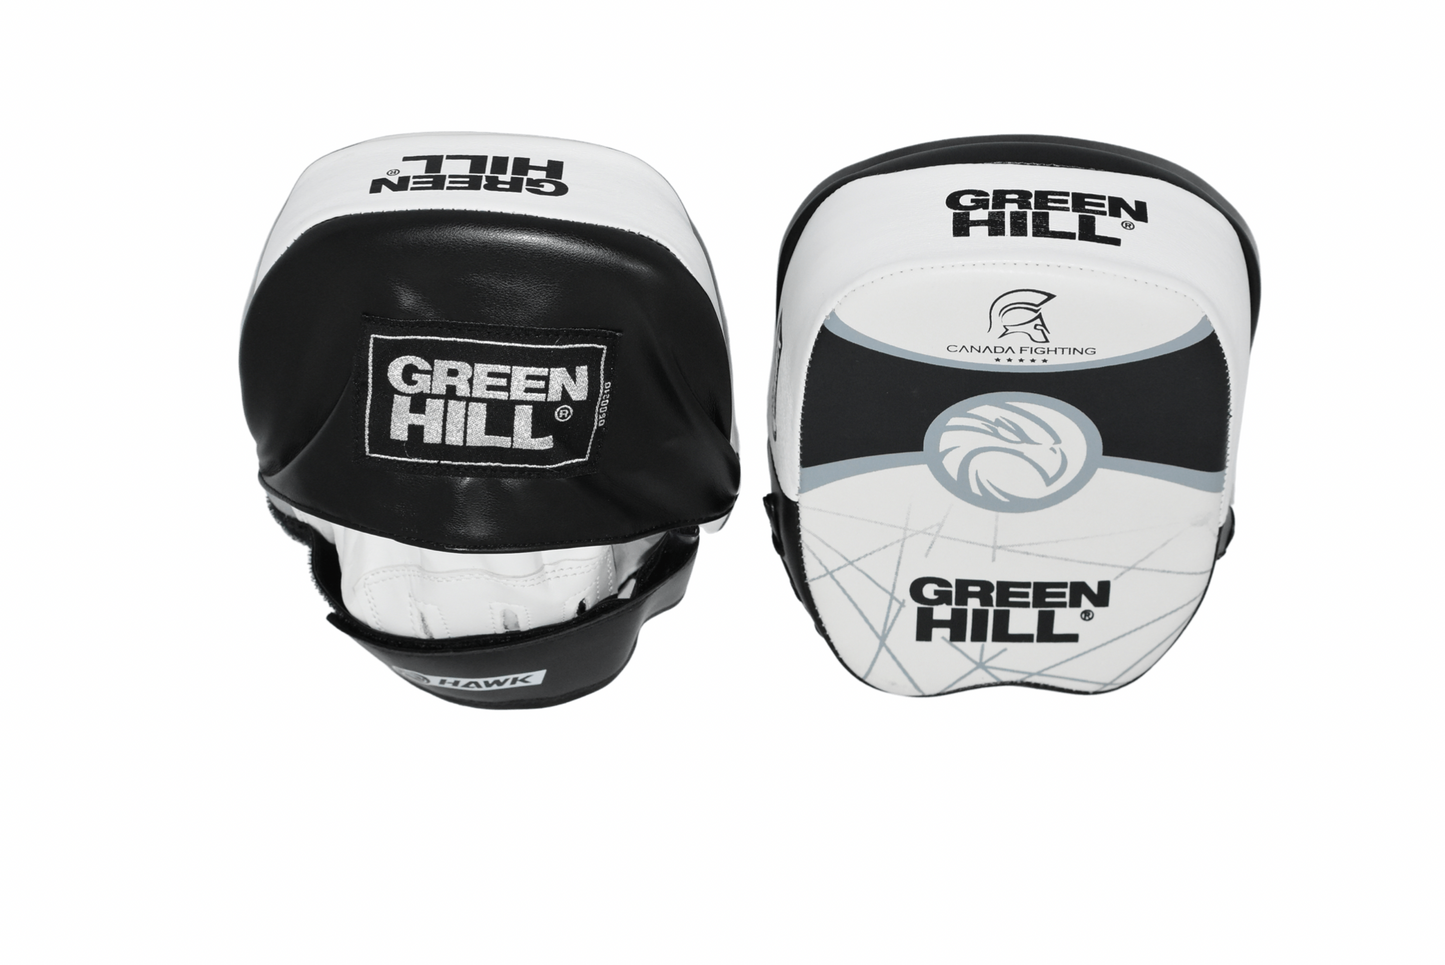 Mitaines de frappe Green Hill Accessoires Green Hill® Canada Fighting